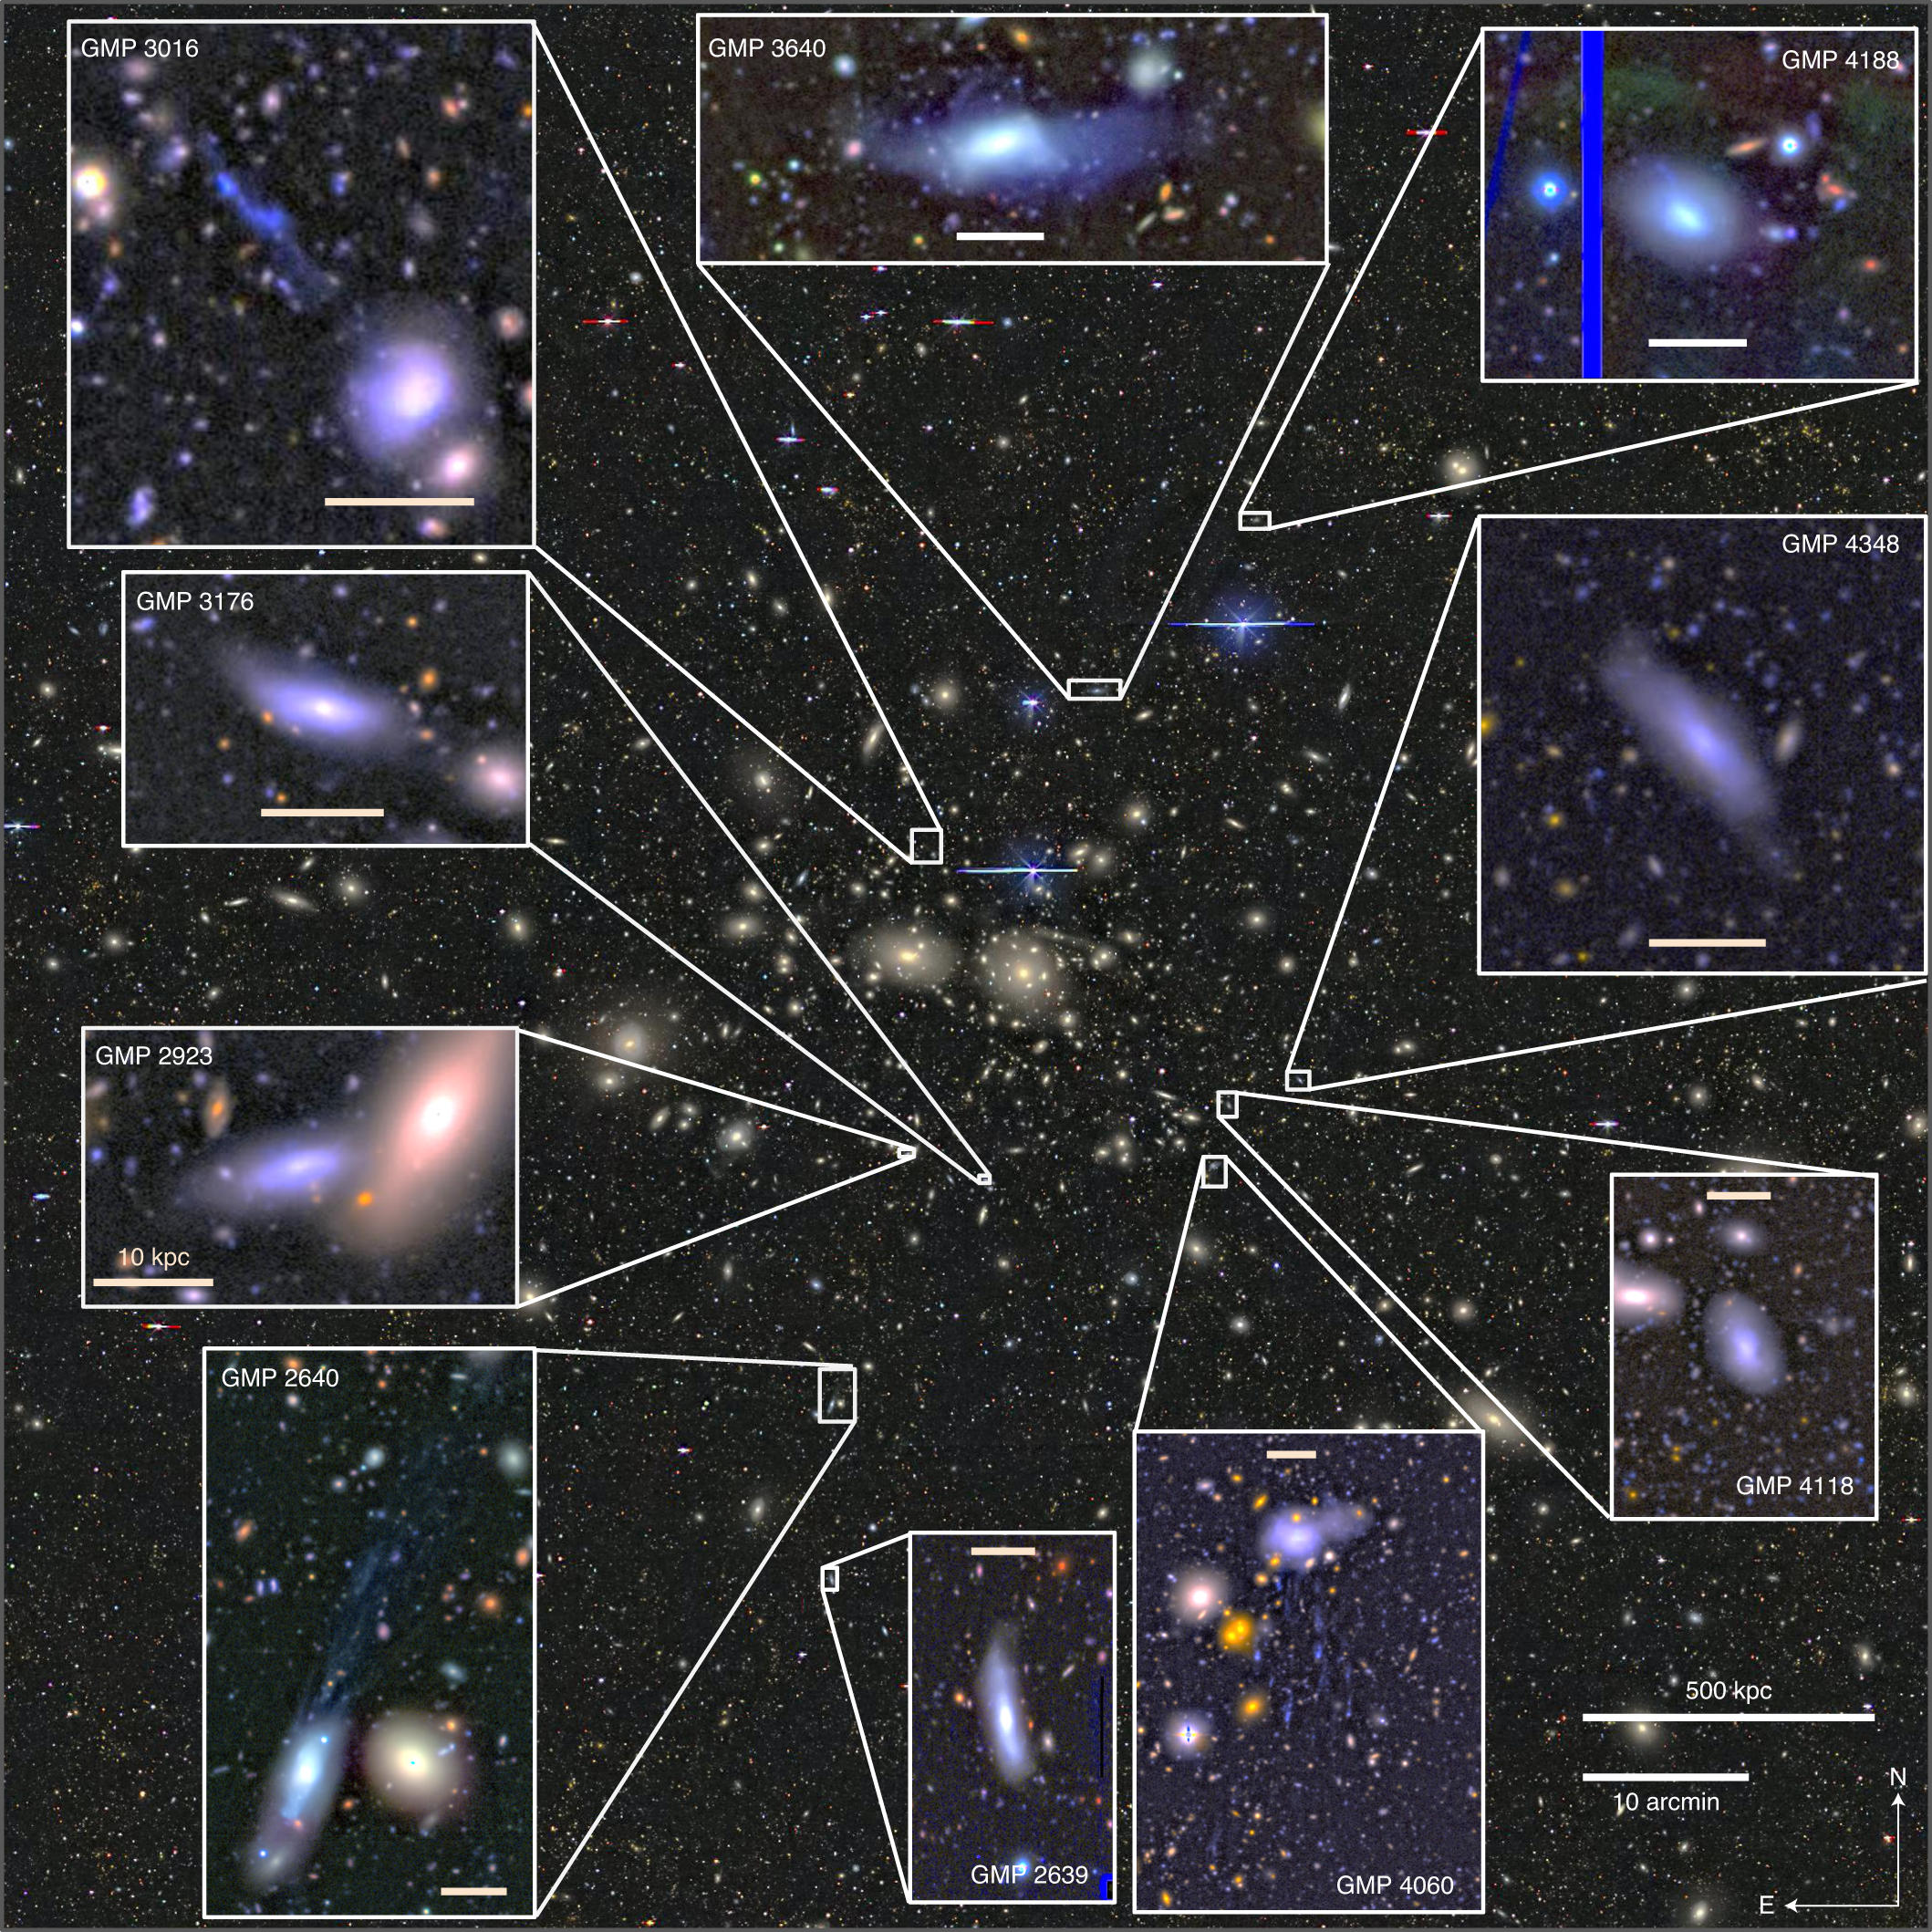 Transforming gas-rich low-mass disky galaxies into ultra-diffuse